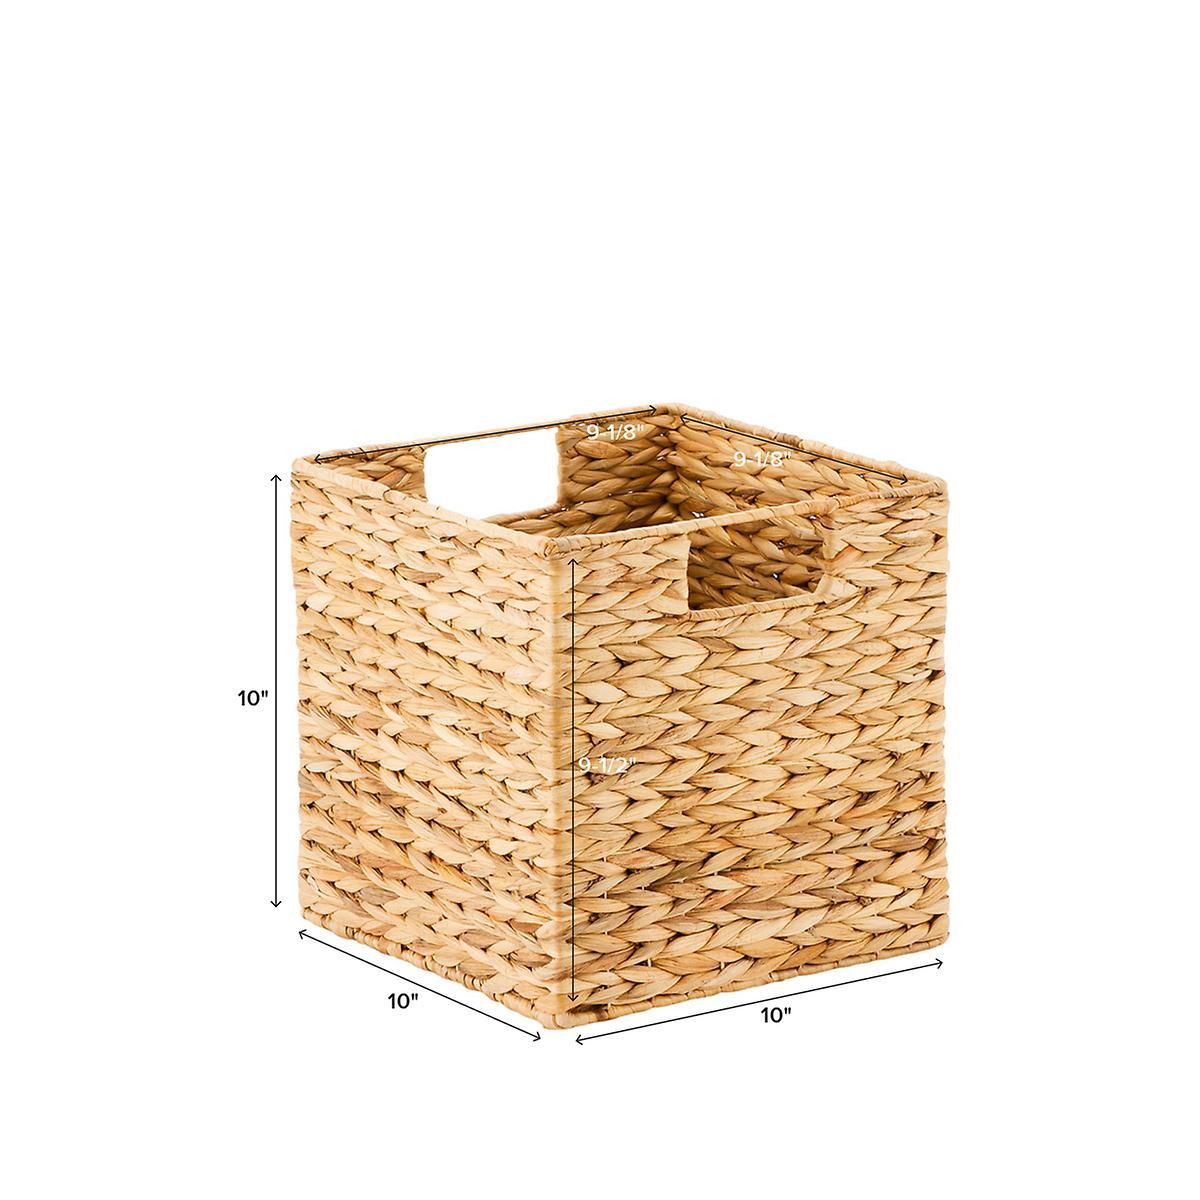 Large Water Hyacinth Cube Natural | The Container Store